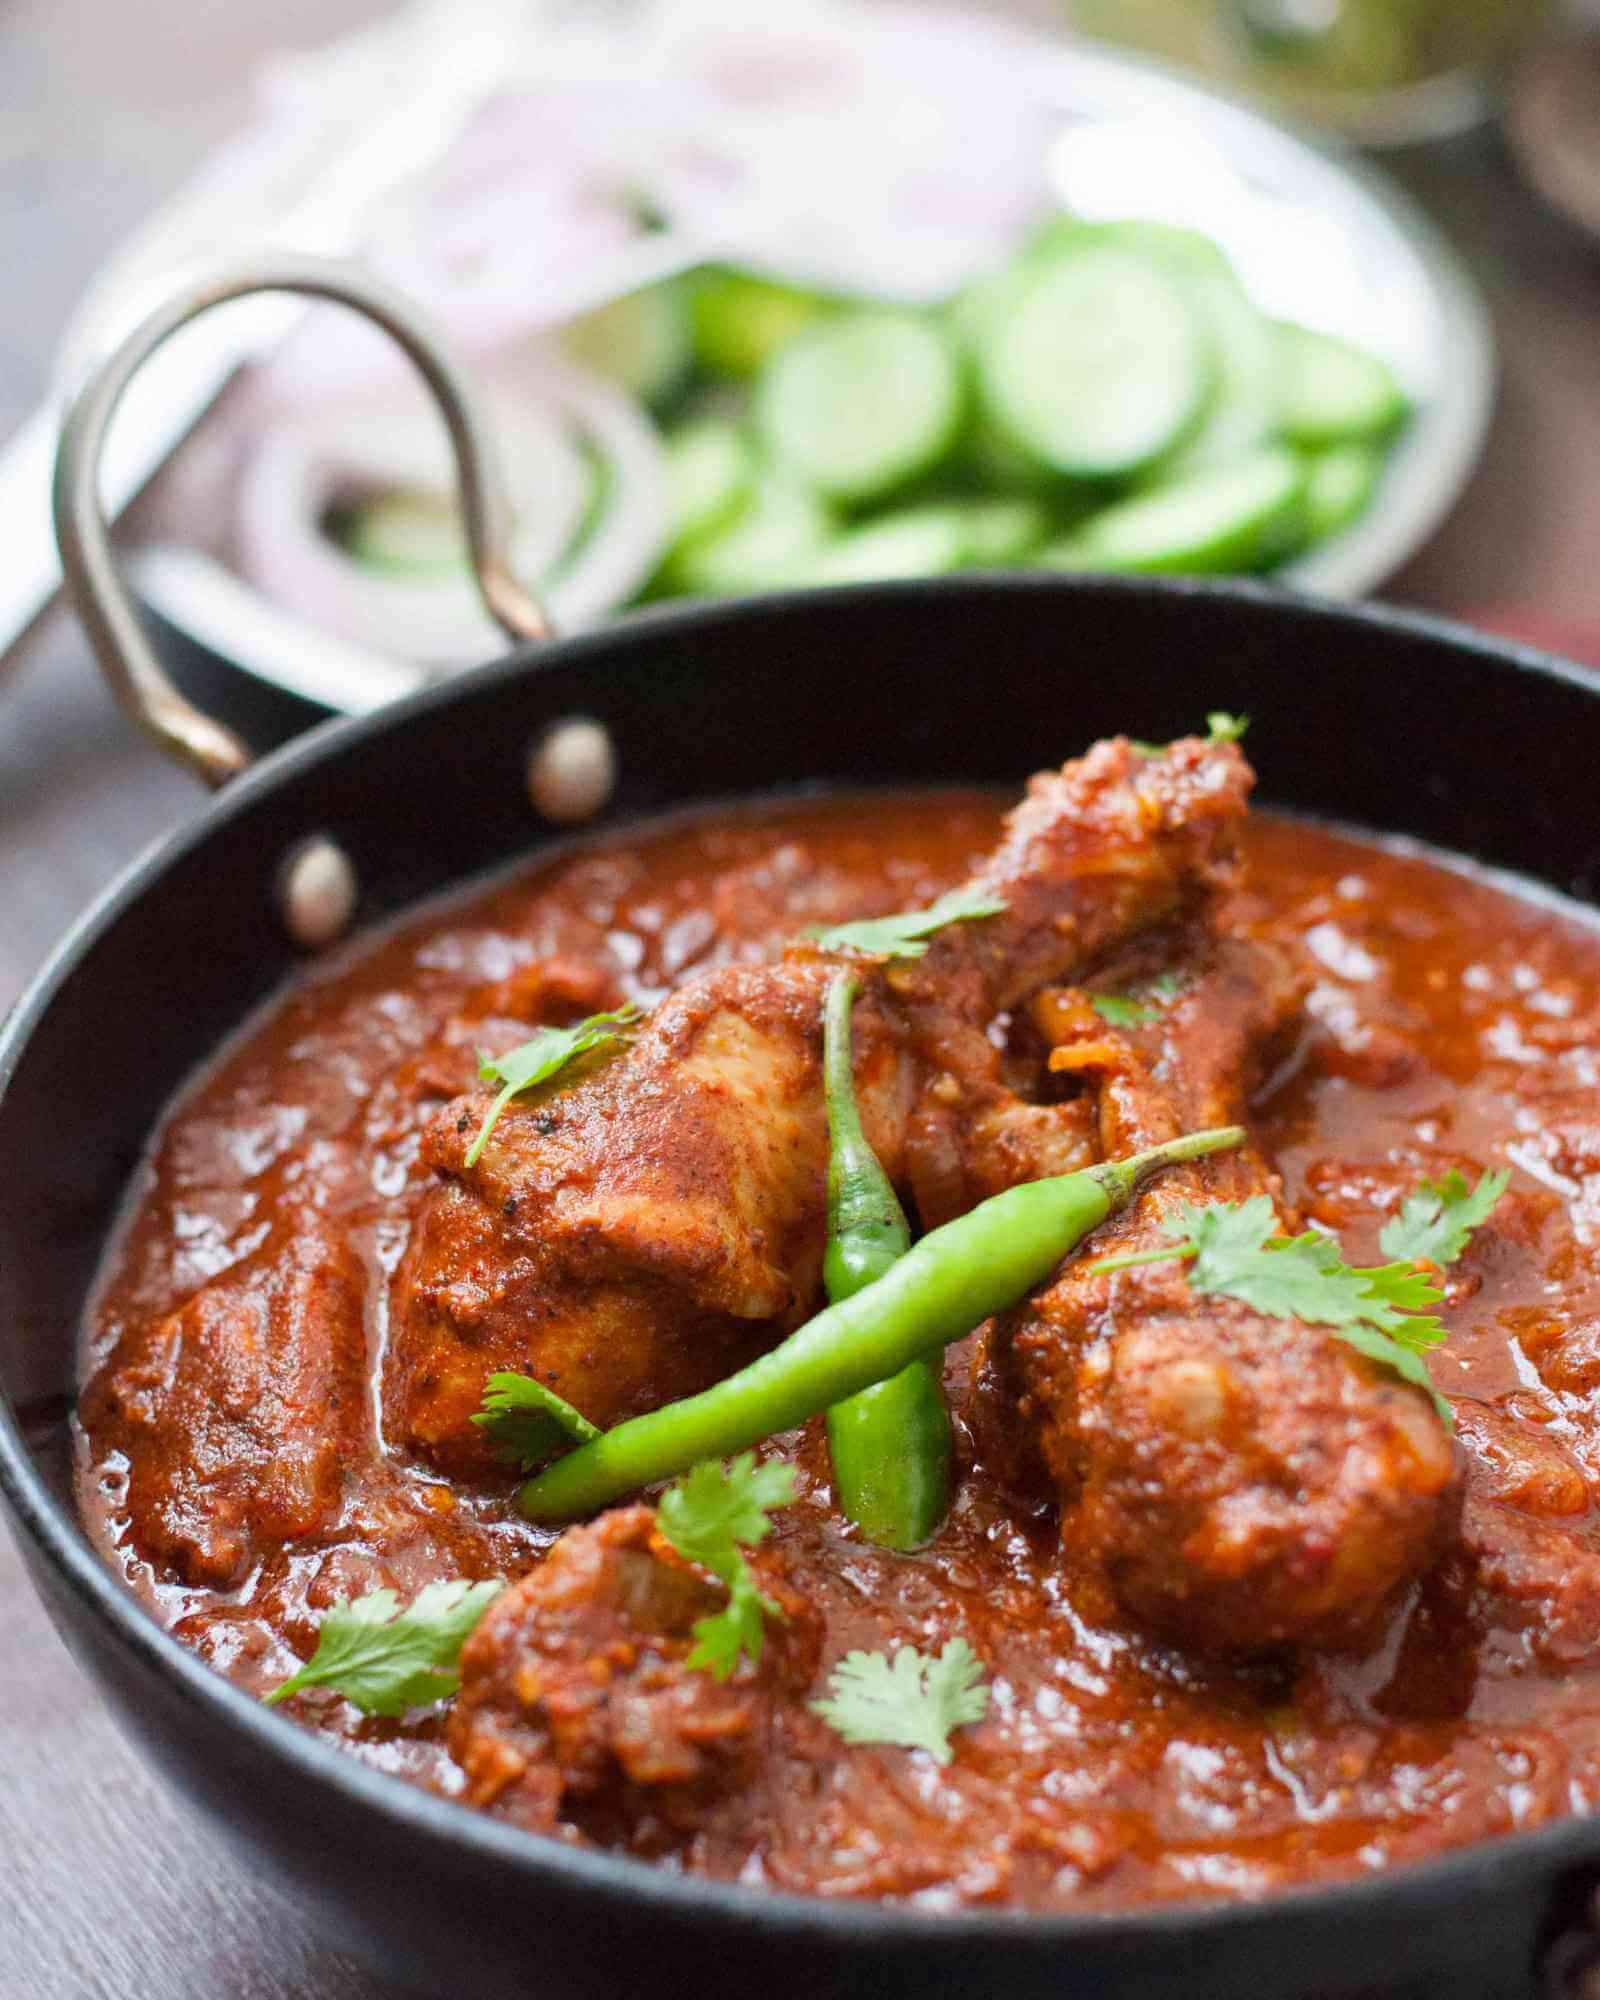 CHICKEN VINDALOO (NORTH INDIAN STYLE)